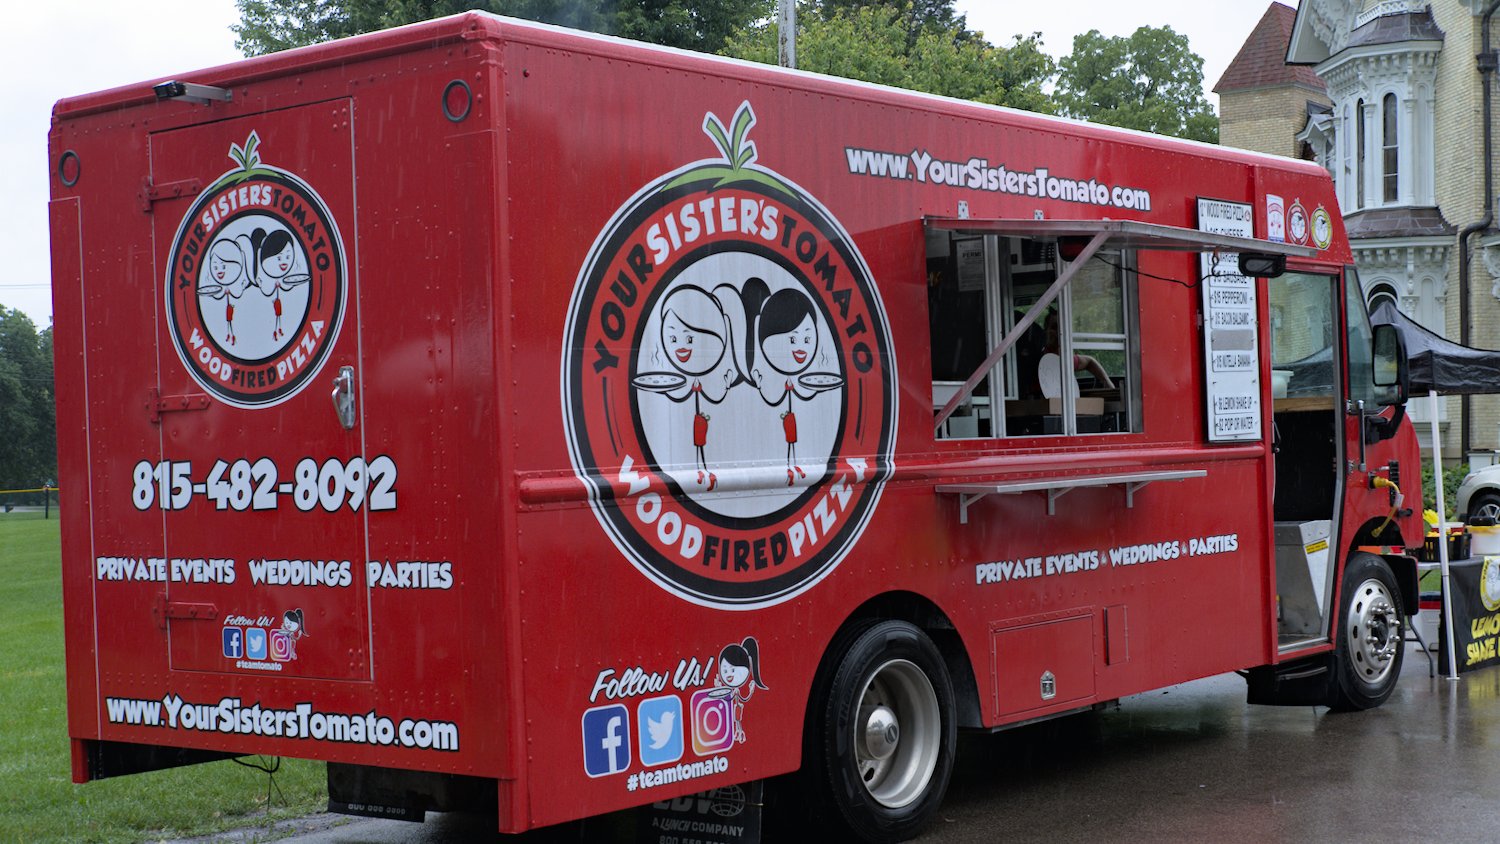 Your Sisters Tomaro Wood Fired Pizza truck.